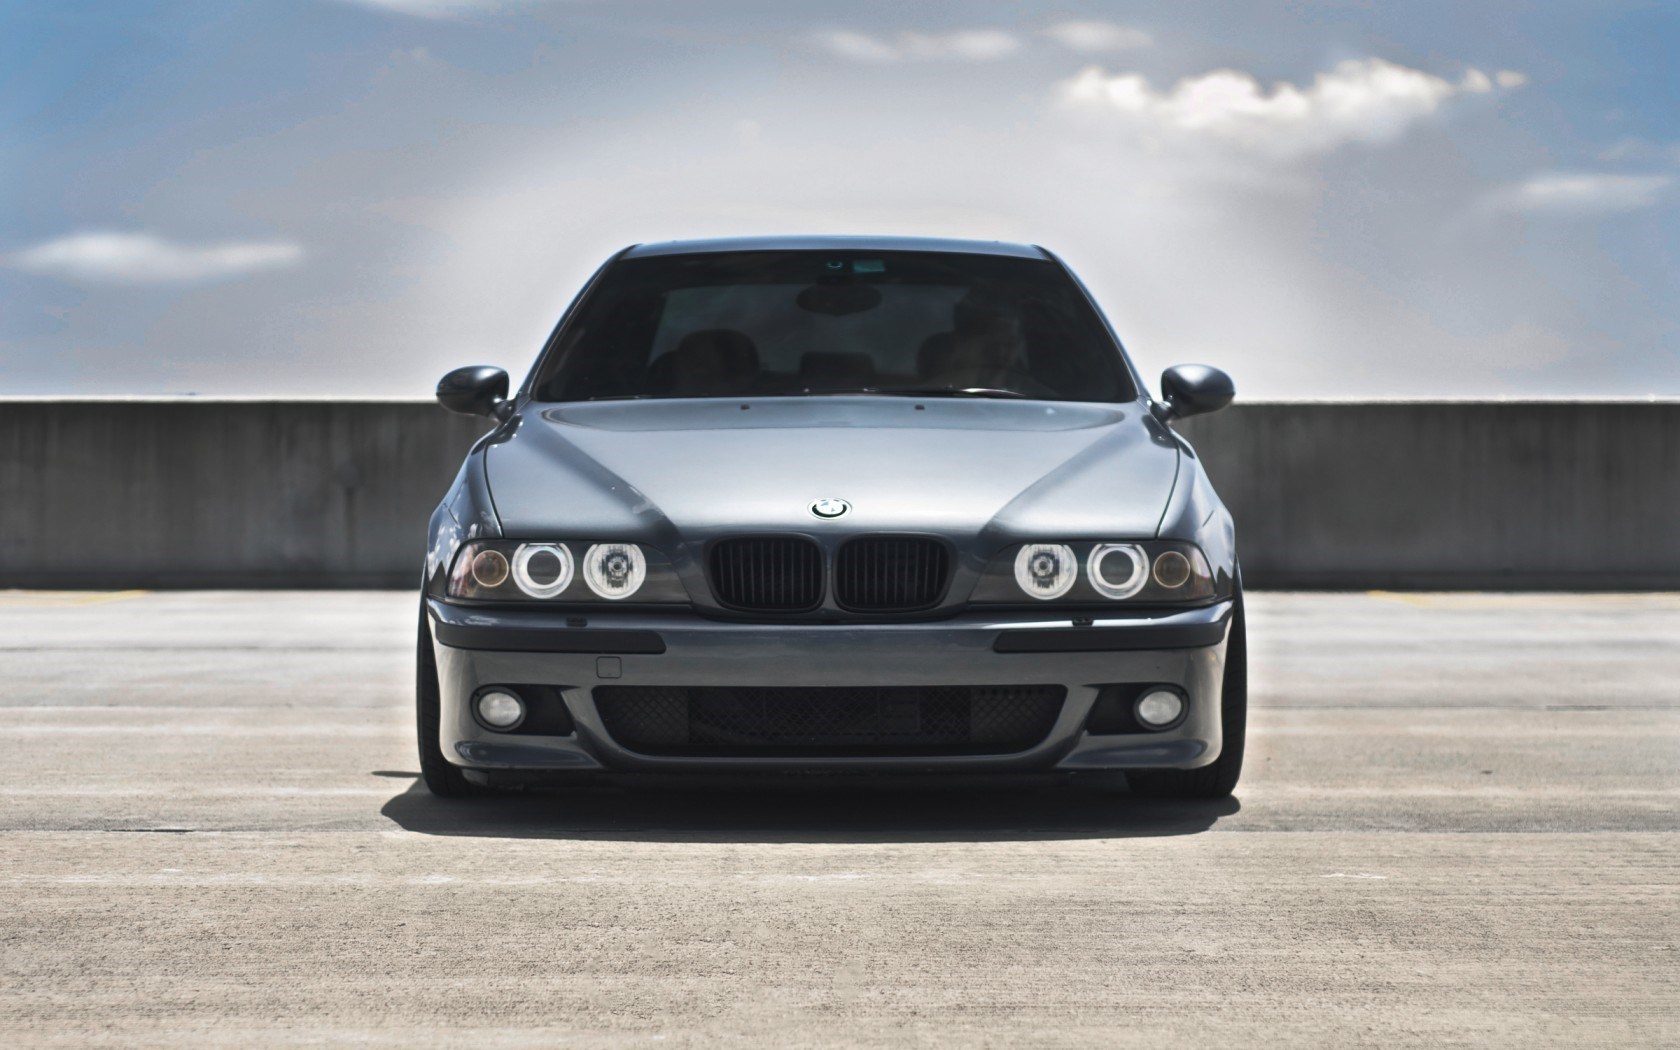 What to Look for When Buying a BMW E39 M5